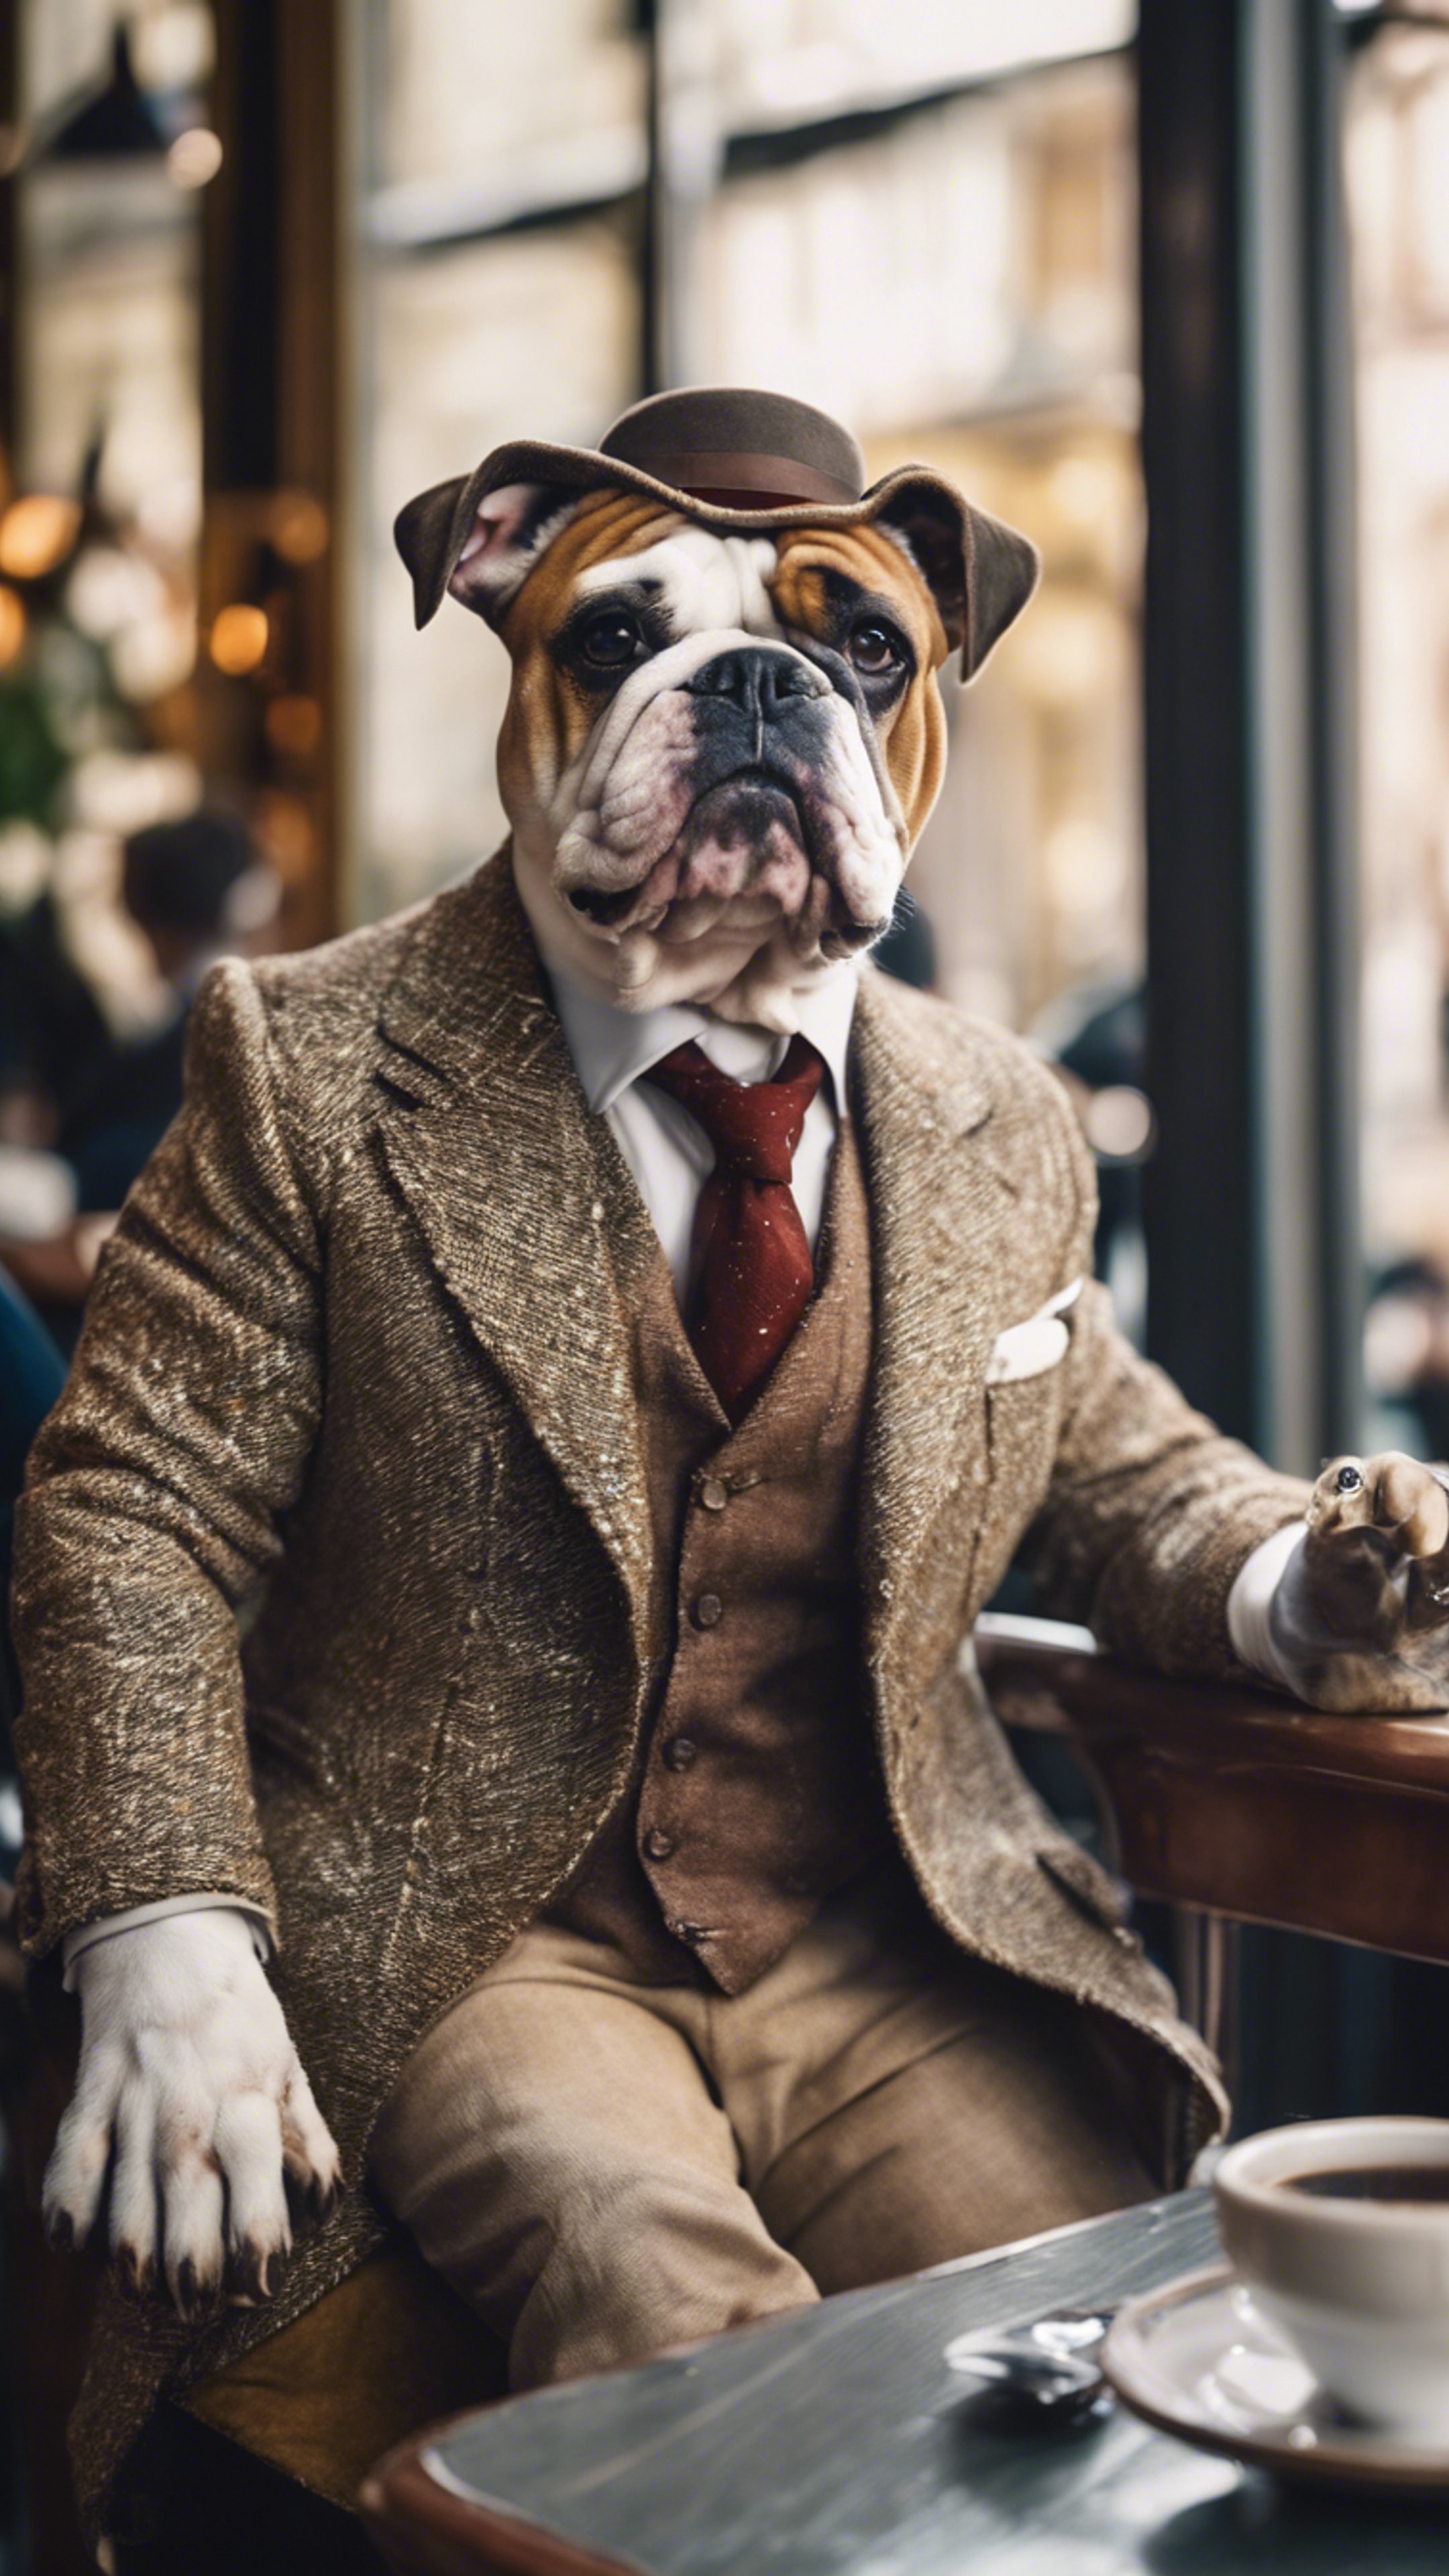 A happy bulldog dressed in a vintage tweed suit, sitting leisurely in a Parisian café.壁紙[7e86417637464b308192]